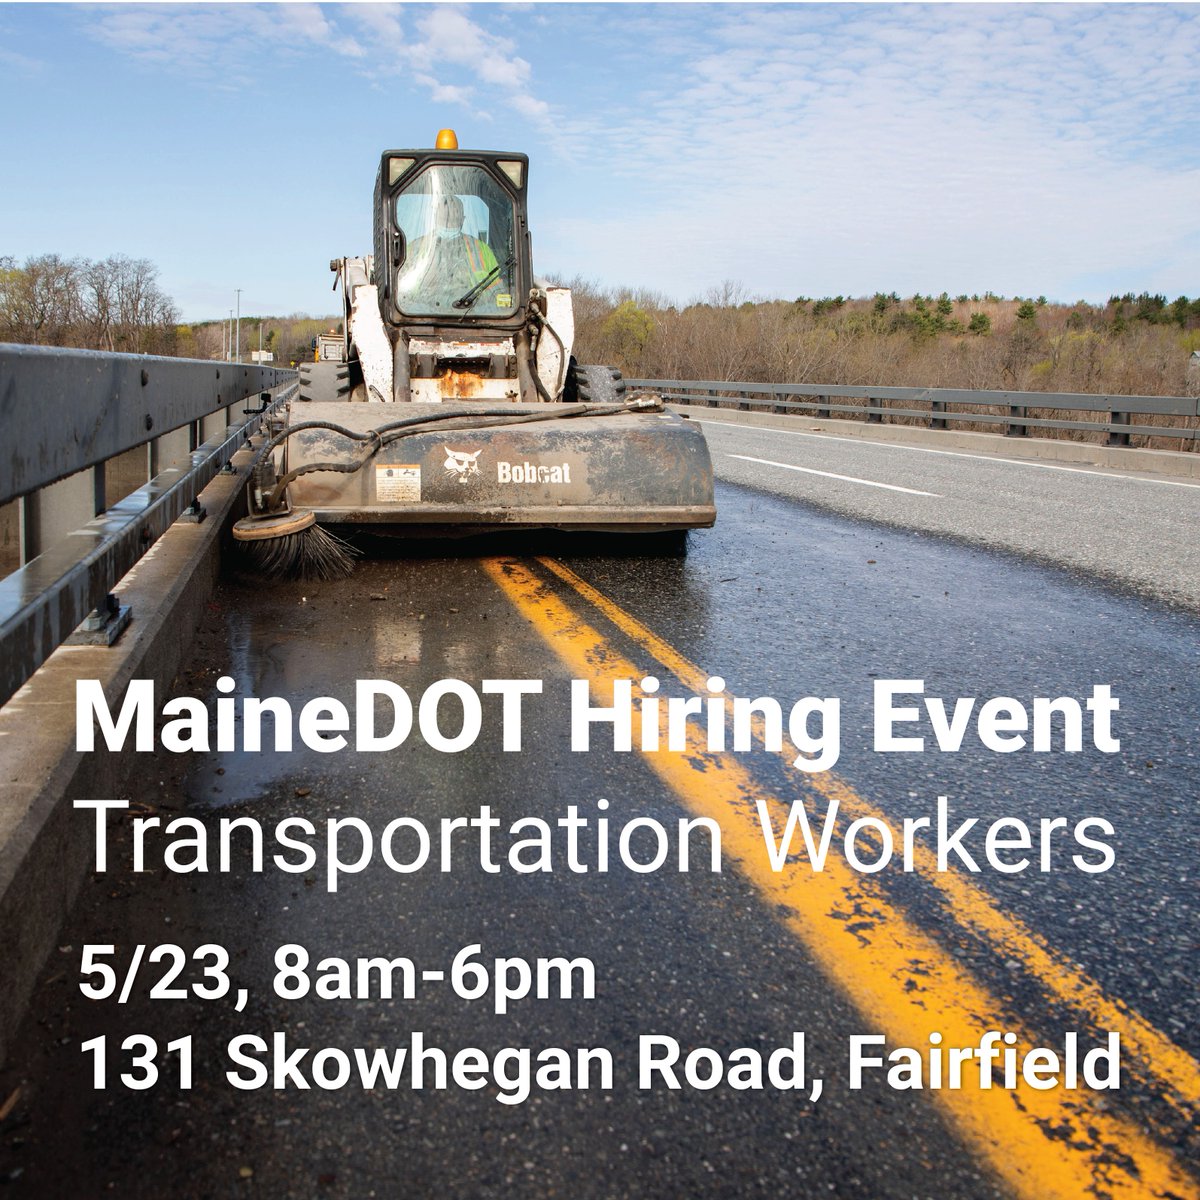 Join us at our Transportation Workers employment event this Thursday. These are full-time, year-round positions that involve plowing in the winter and construction work in the summer. Join the team that keeps Maine moving!